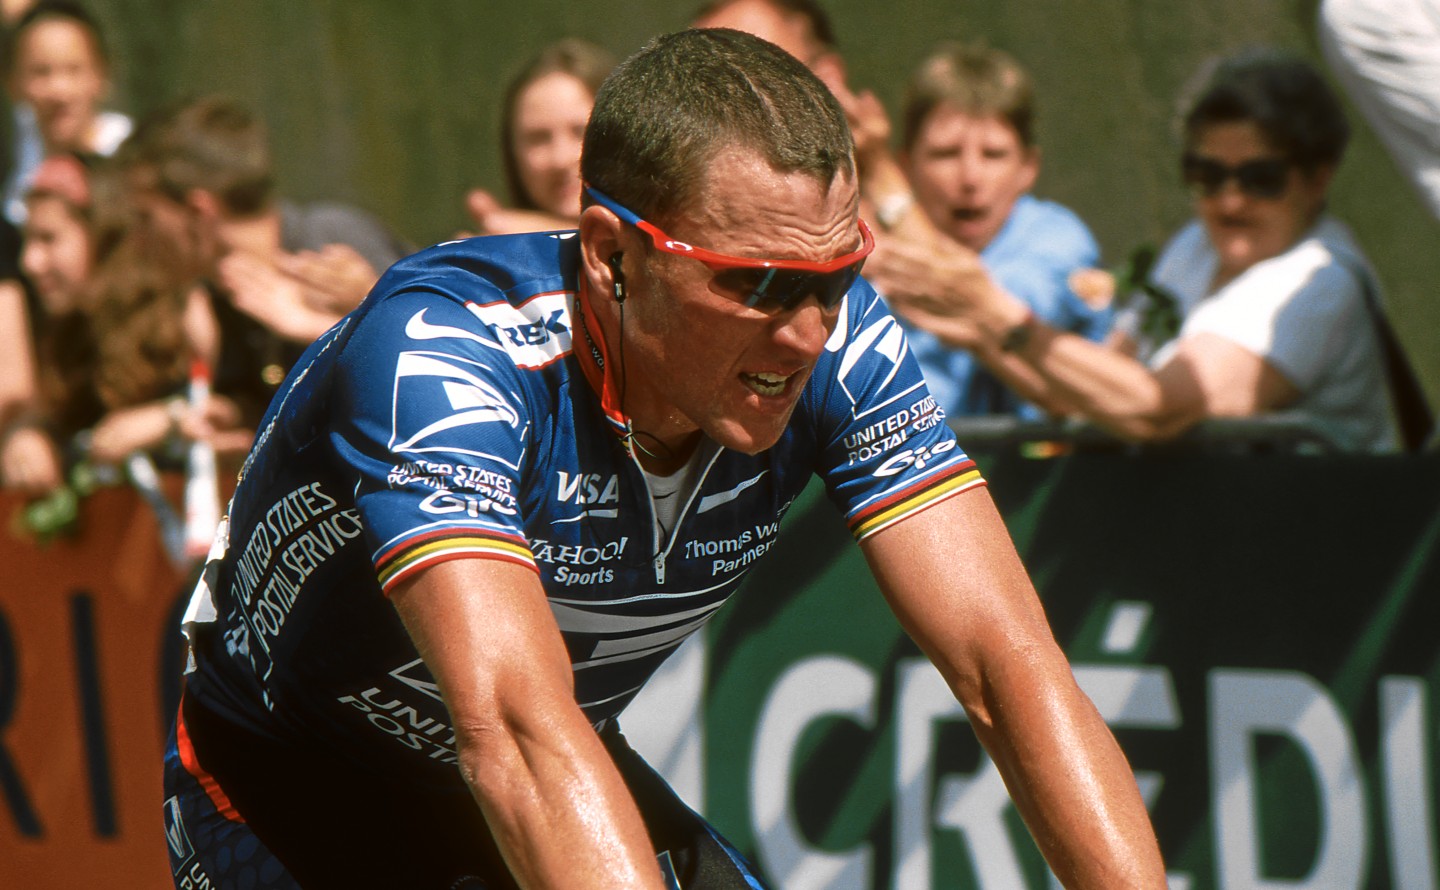 "<a href="http://commons.wikimedia.org/wiki/File:Lance_Armstrong_MidiLibre_2002.jpg#mediaviewer/File:Lance_Armstrong_MidiLibre_2002.jpg">Lance Armstrong MidiLibre 2002</a>" by <a href="//de.wikipedia.org/wiki/Benutzer:Hase" class="extiw" title="de:Benutzer:Hase">de:Benutzer:Hase</a> - Self-photographed. Licensed under <a title="Creative Commons Attribution-Share Alike 3.0" href="http://creativecommons.org/licenses/by-sa/3.0">CC BY-SA 3.0</a> via <a href="//commons.wikimedia.org/wiki/">Wikimedia Commons</a>.